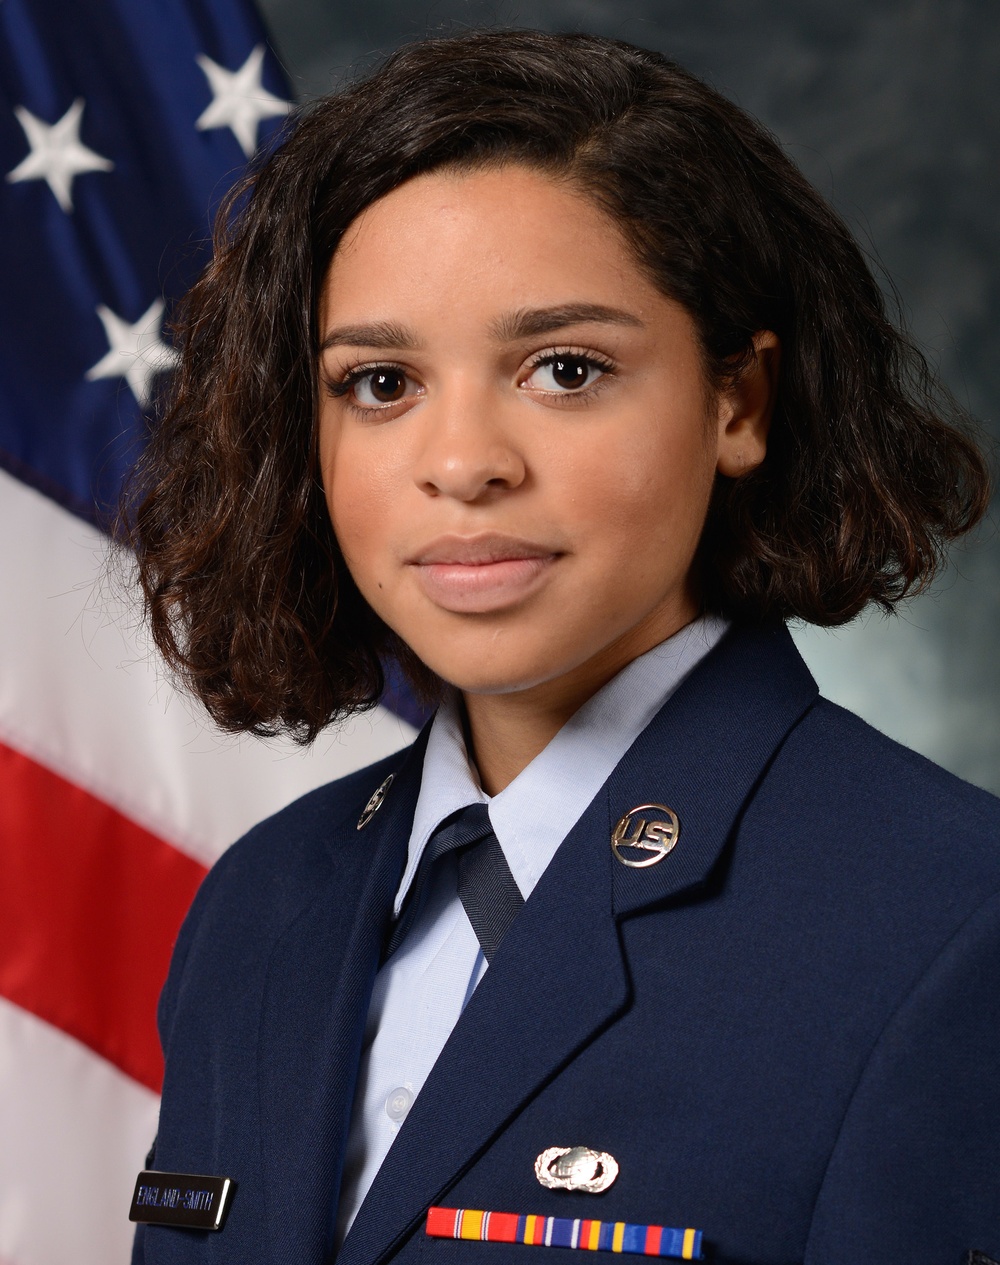 Airman’s Council president shares leadership perspective